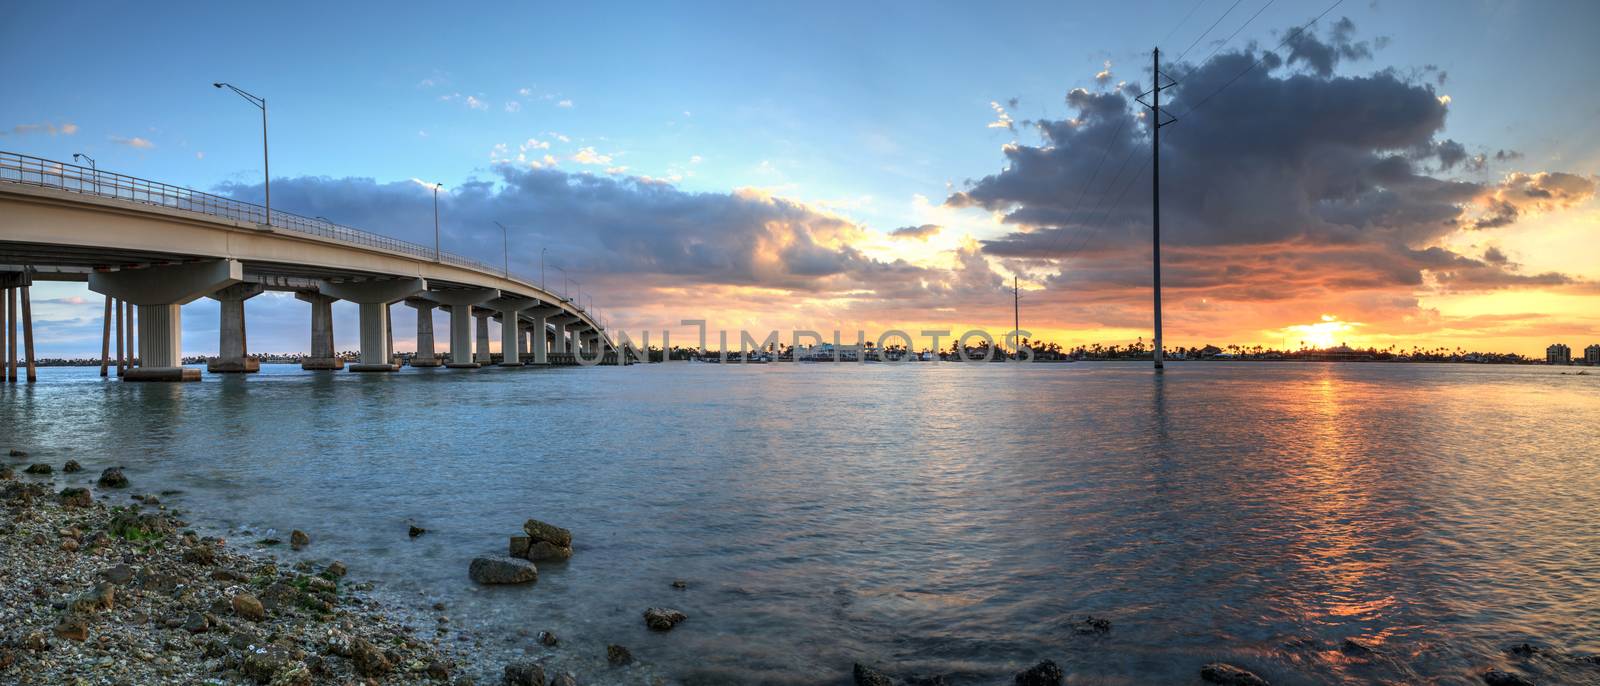 Sunset over the bridge roadway that journeys onto Marco Island, by steffstarr